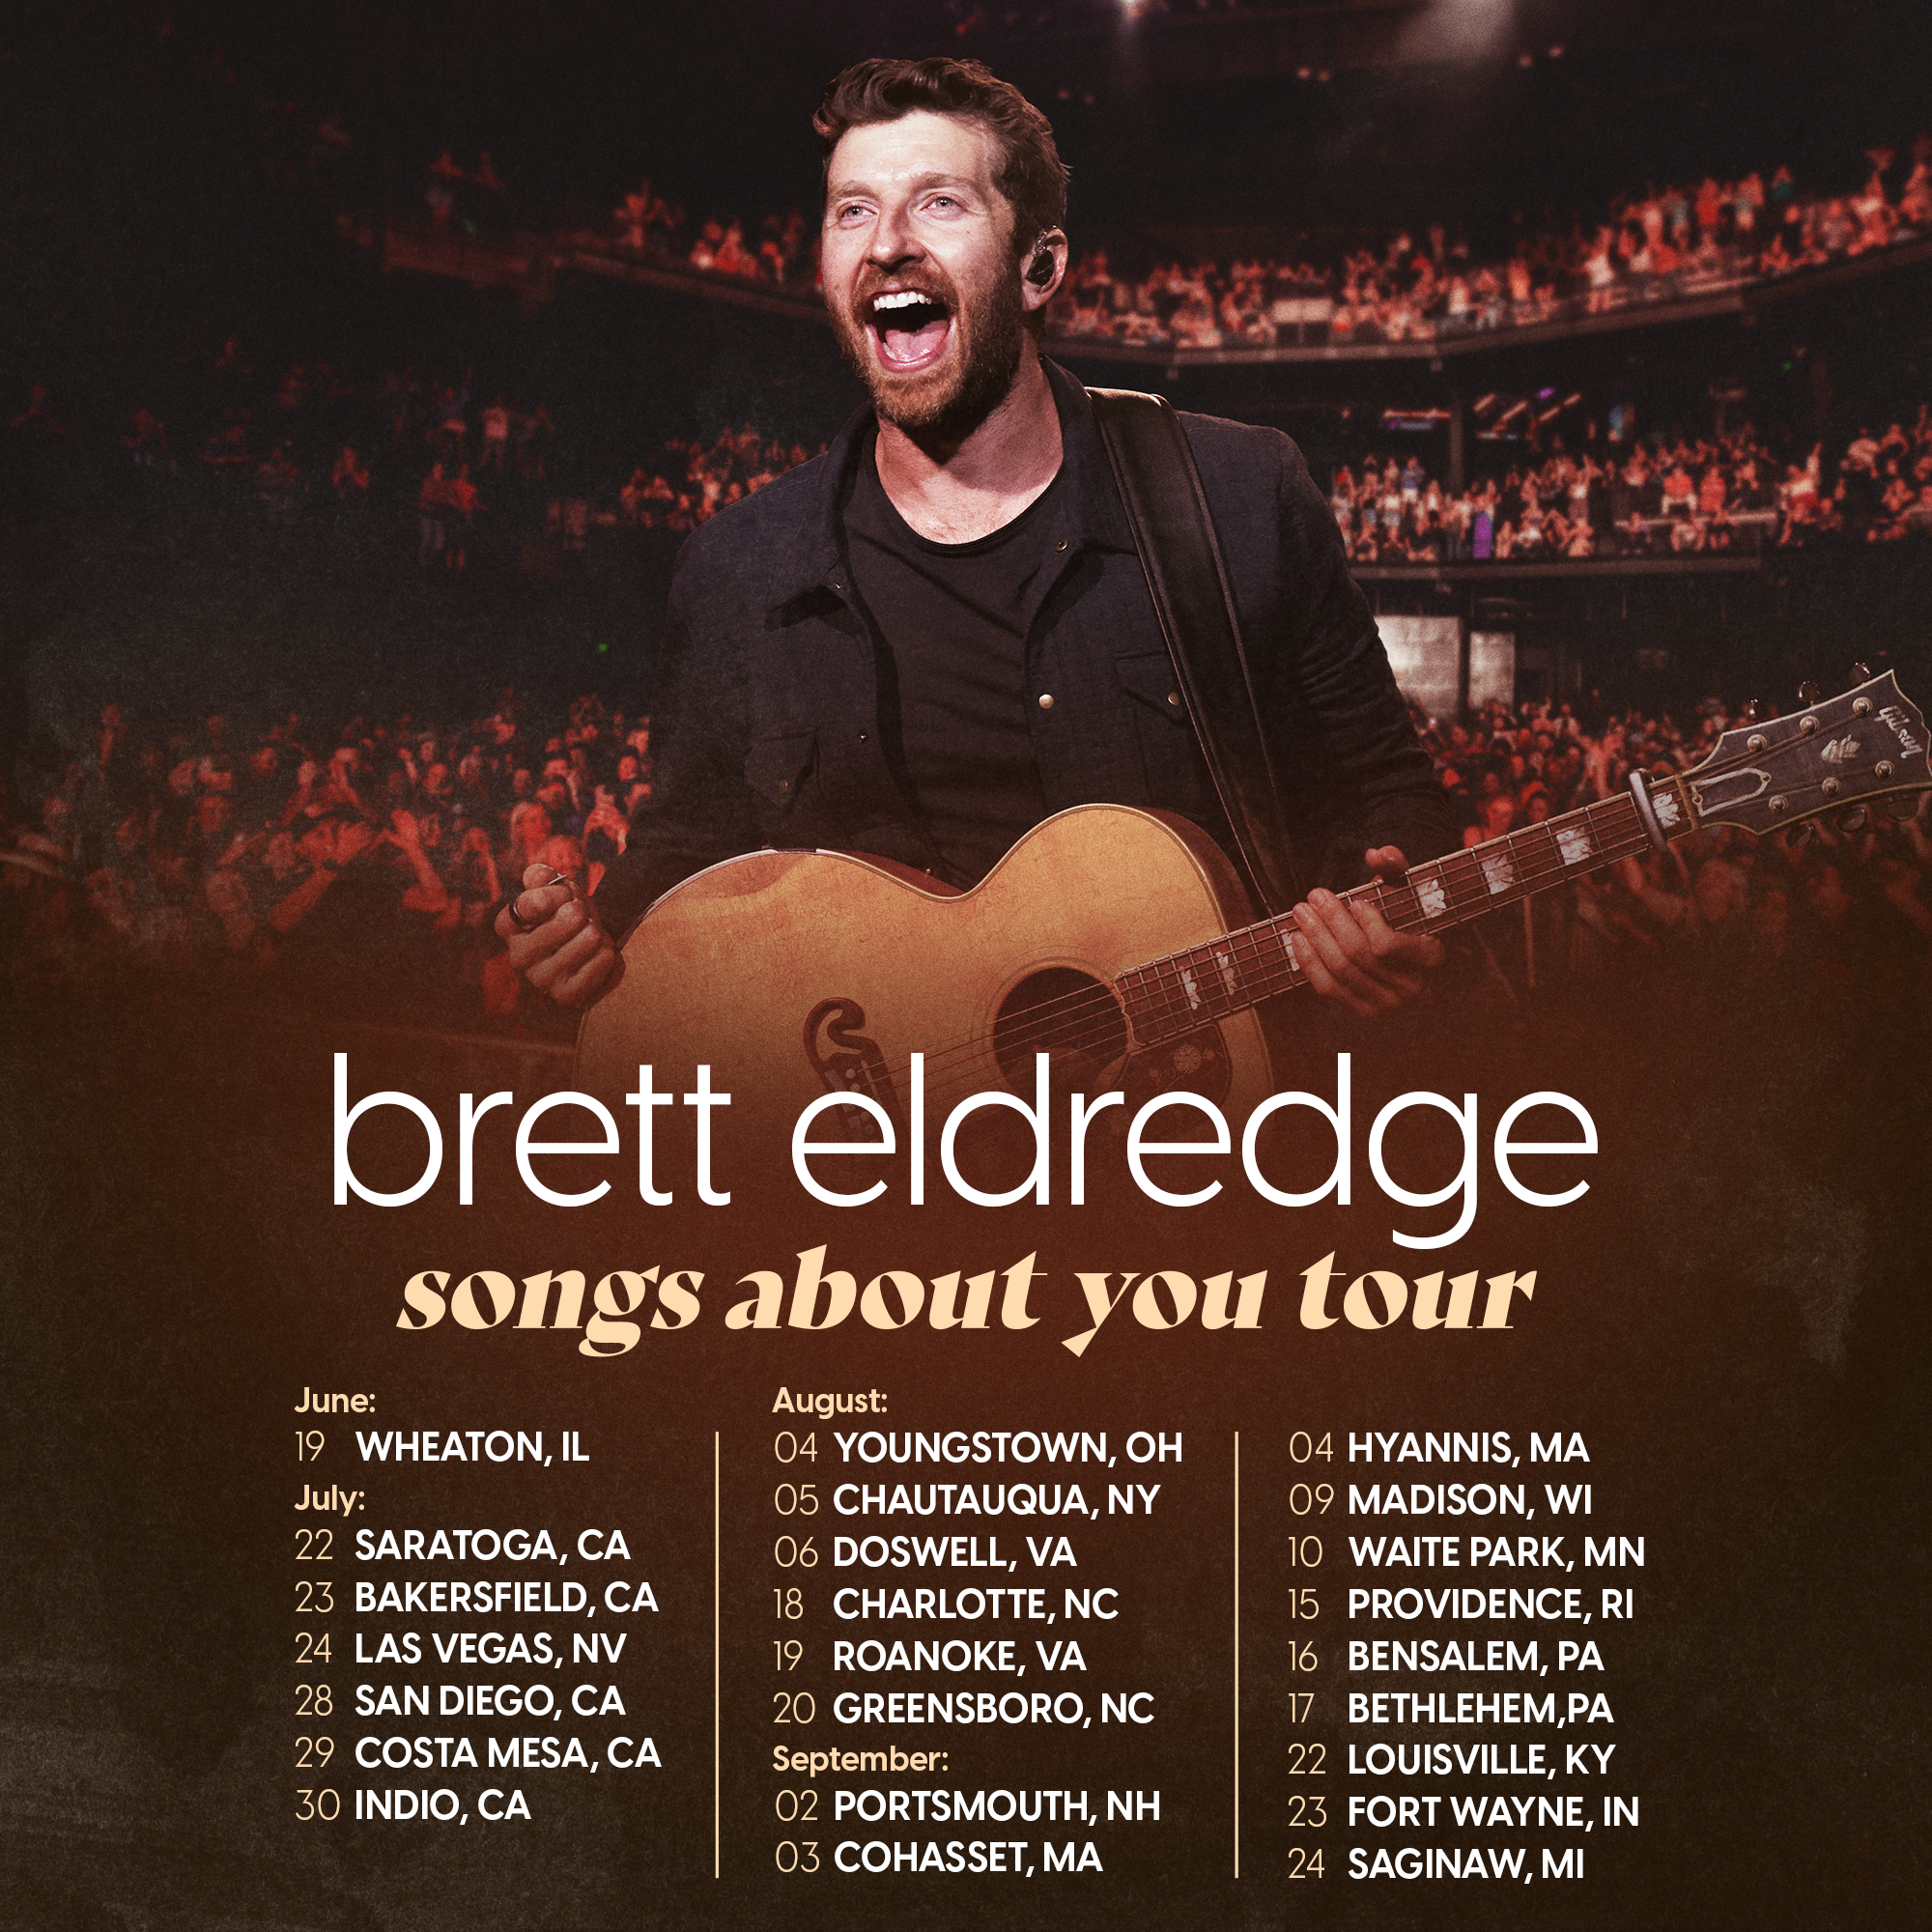 BRETT ELDREDGE ANNOUNCES HEADLINING SONGS ABOUT YOU TOUR, BUILDS ANTICIPATION WITH NEW TRACK “WAIT UP FOR ME” TODAY